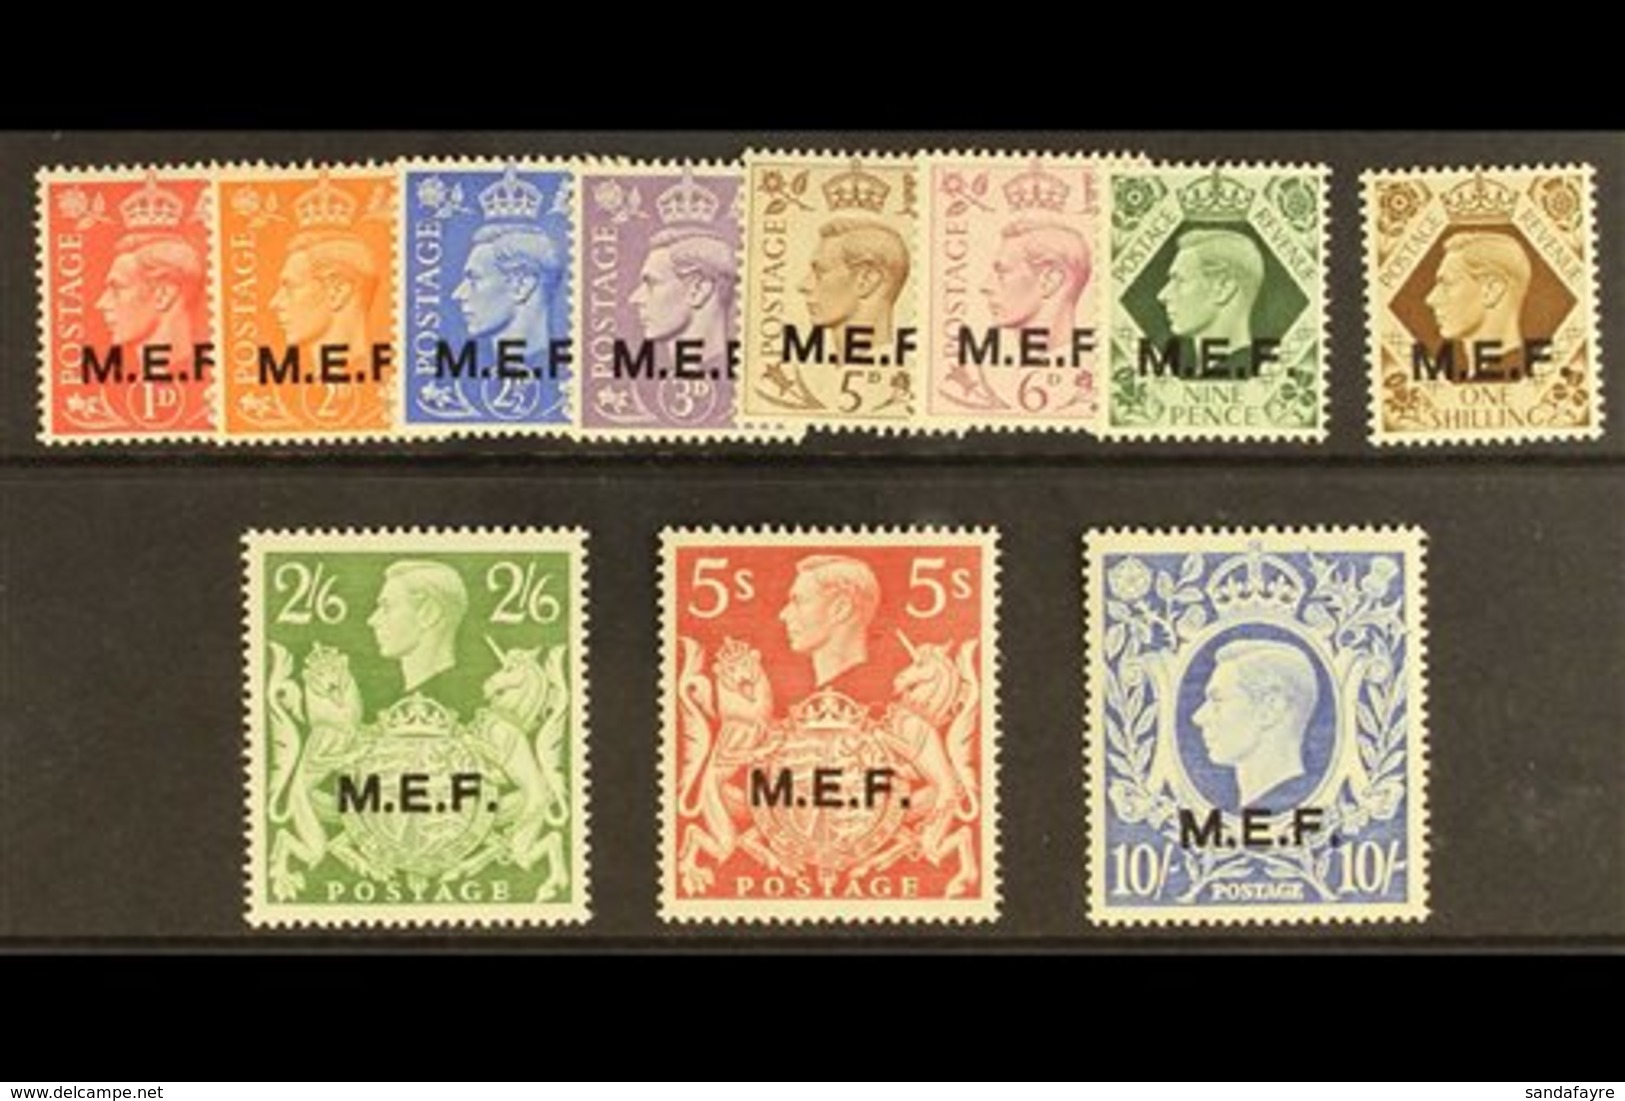 MIDDLE EAST FORCES 1943-47 "M.E.F." Overprints Complete Set, SG M11/M21, Never Hinged Mint. (11 Stamps) For More Images, - Africa Orientale Italiana